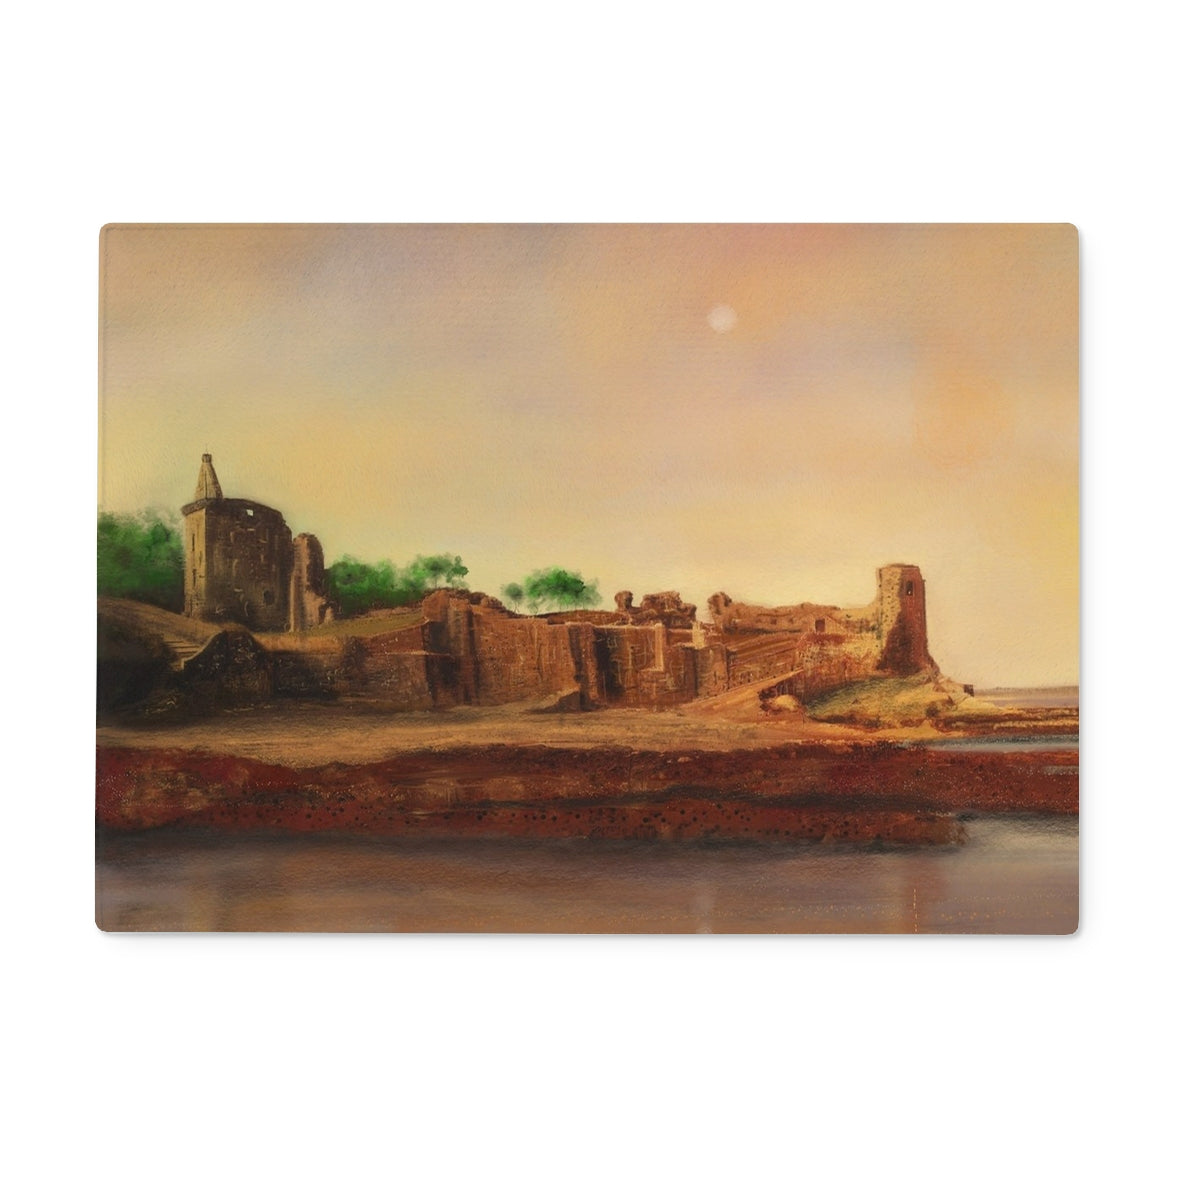 St Andrews Castle Art Gifts Glass Chopping Board-Glass Chopping Boards-Historic & Iconic Scotland Art Gallery-15"x11" Rectangular-Paintings, Prints, Homeware, Art Gifts From Scotland By Scottish Artist Kevin Hunter